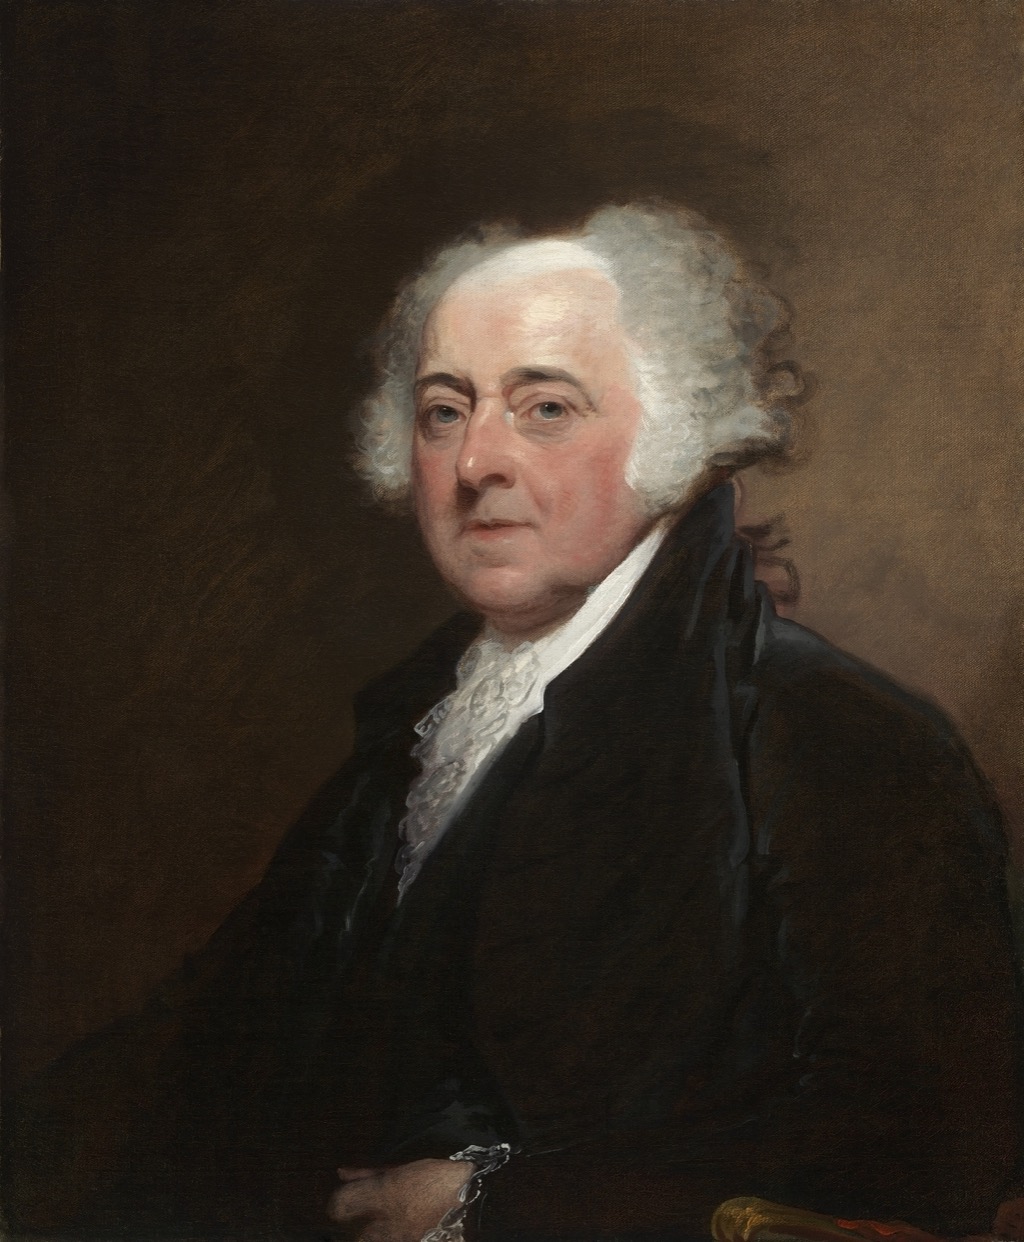 President John Adams Famous People Who Used to be Teachers